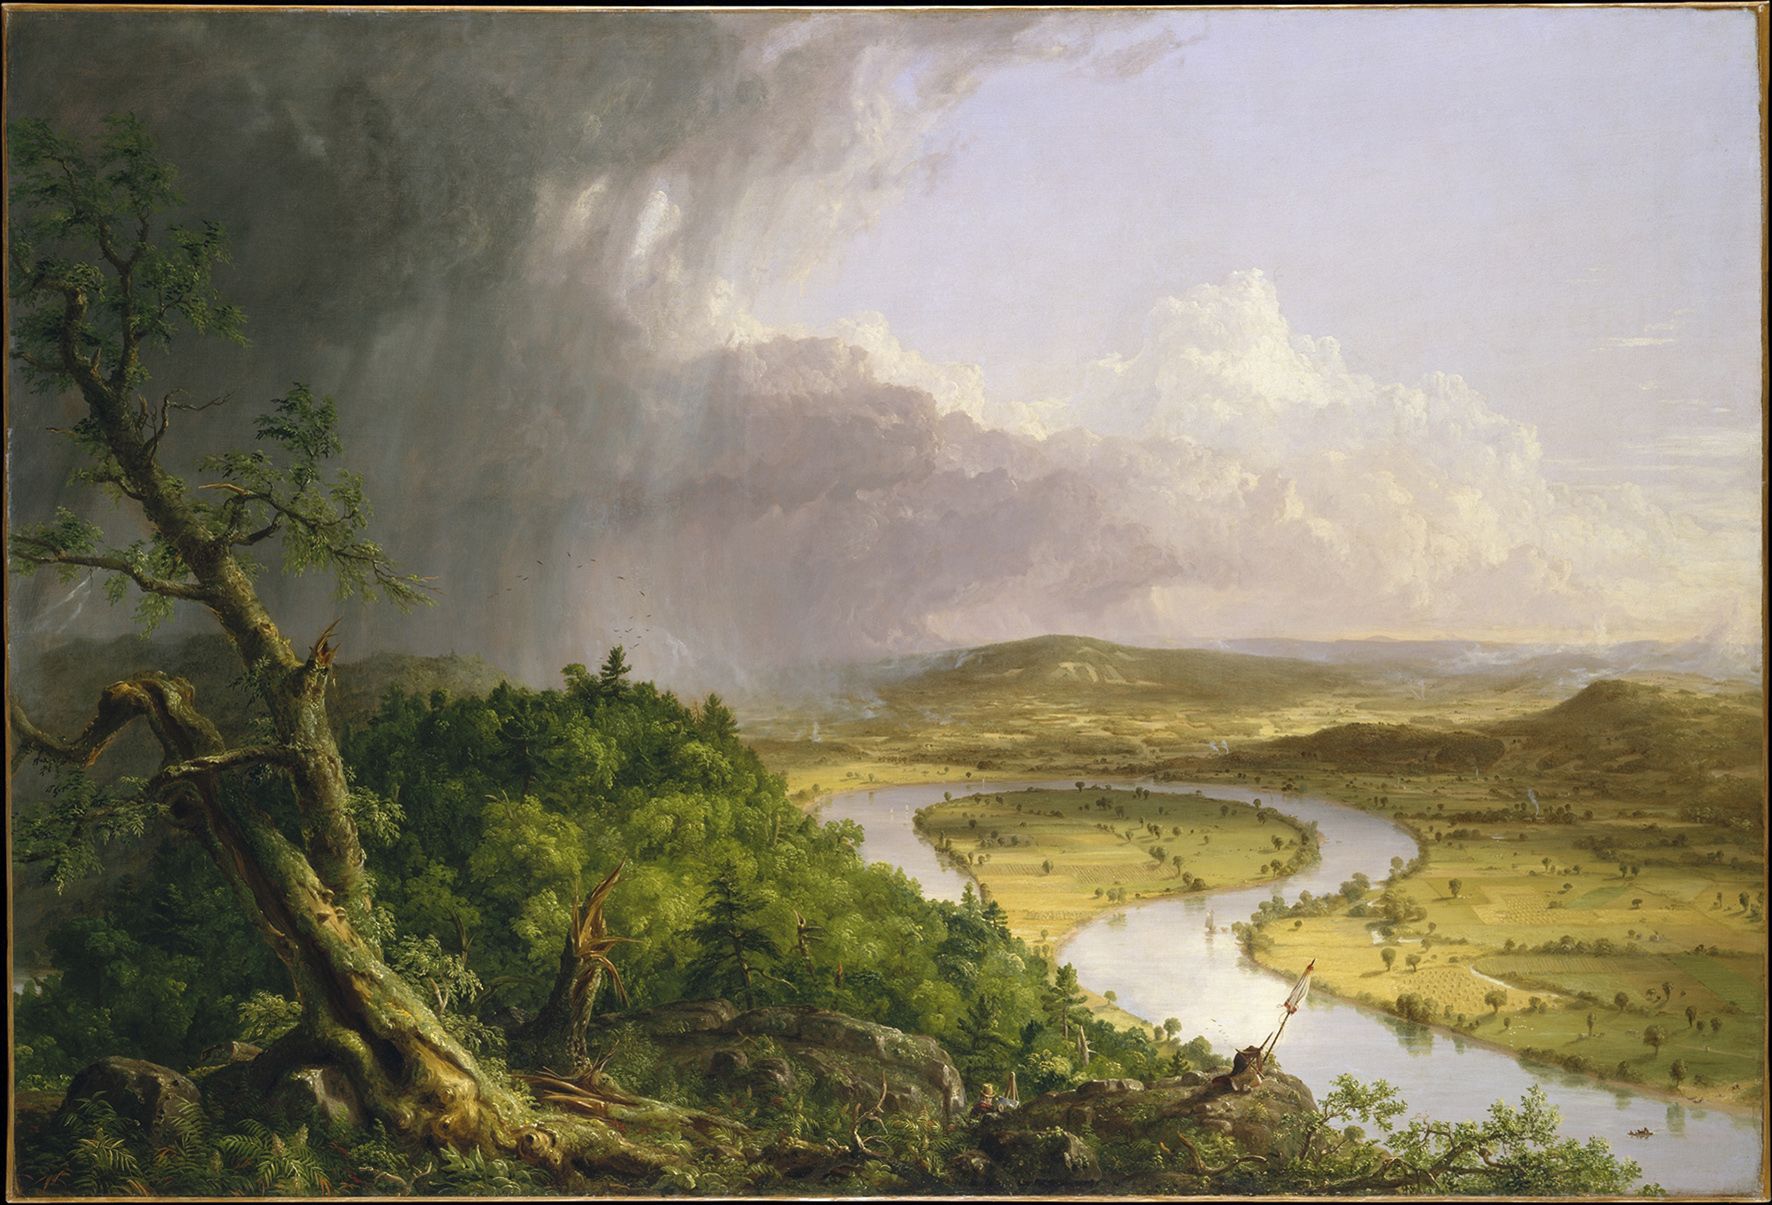 Thomas Cole View from Mount Holyoke, Northampton, Massachusetts, after a Thunderstorm - The Oxbow, 1836 Oil on canvas 130.8 x 193 cm The Metropolitan Museum of Art, New York, Gift of Mrs Russell Sage (08.228) © The Metropolitan Museum of Art, New York